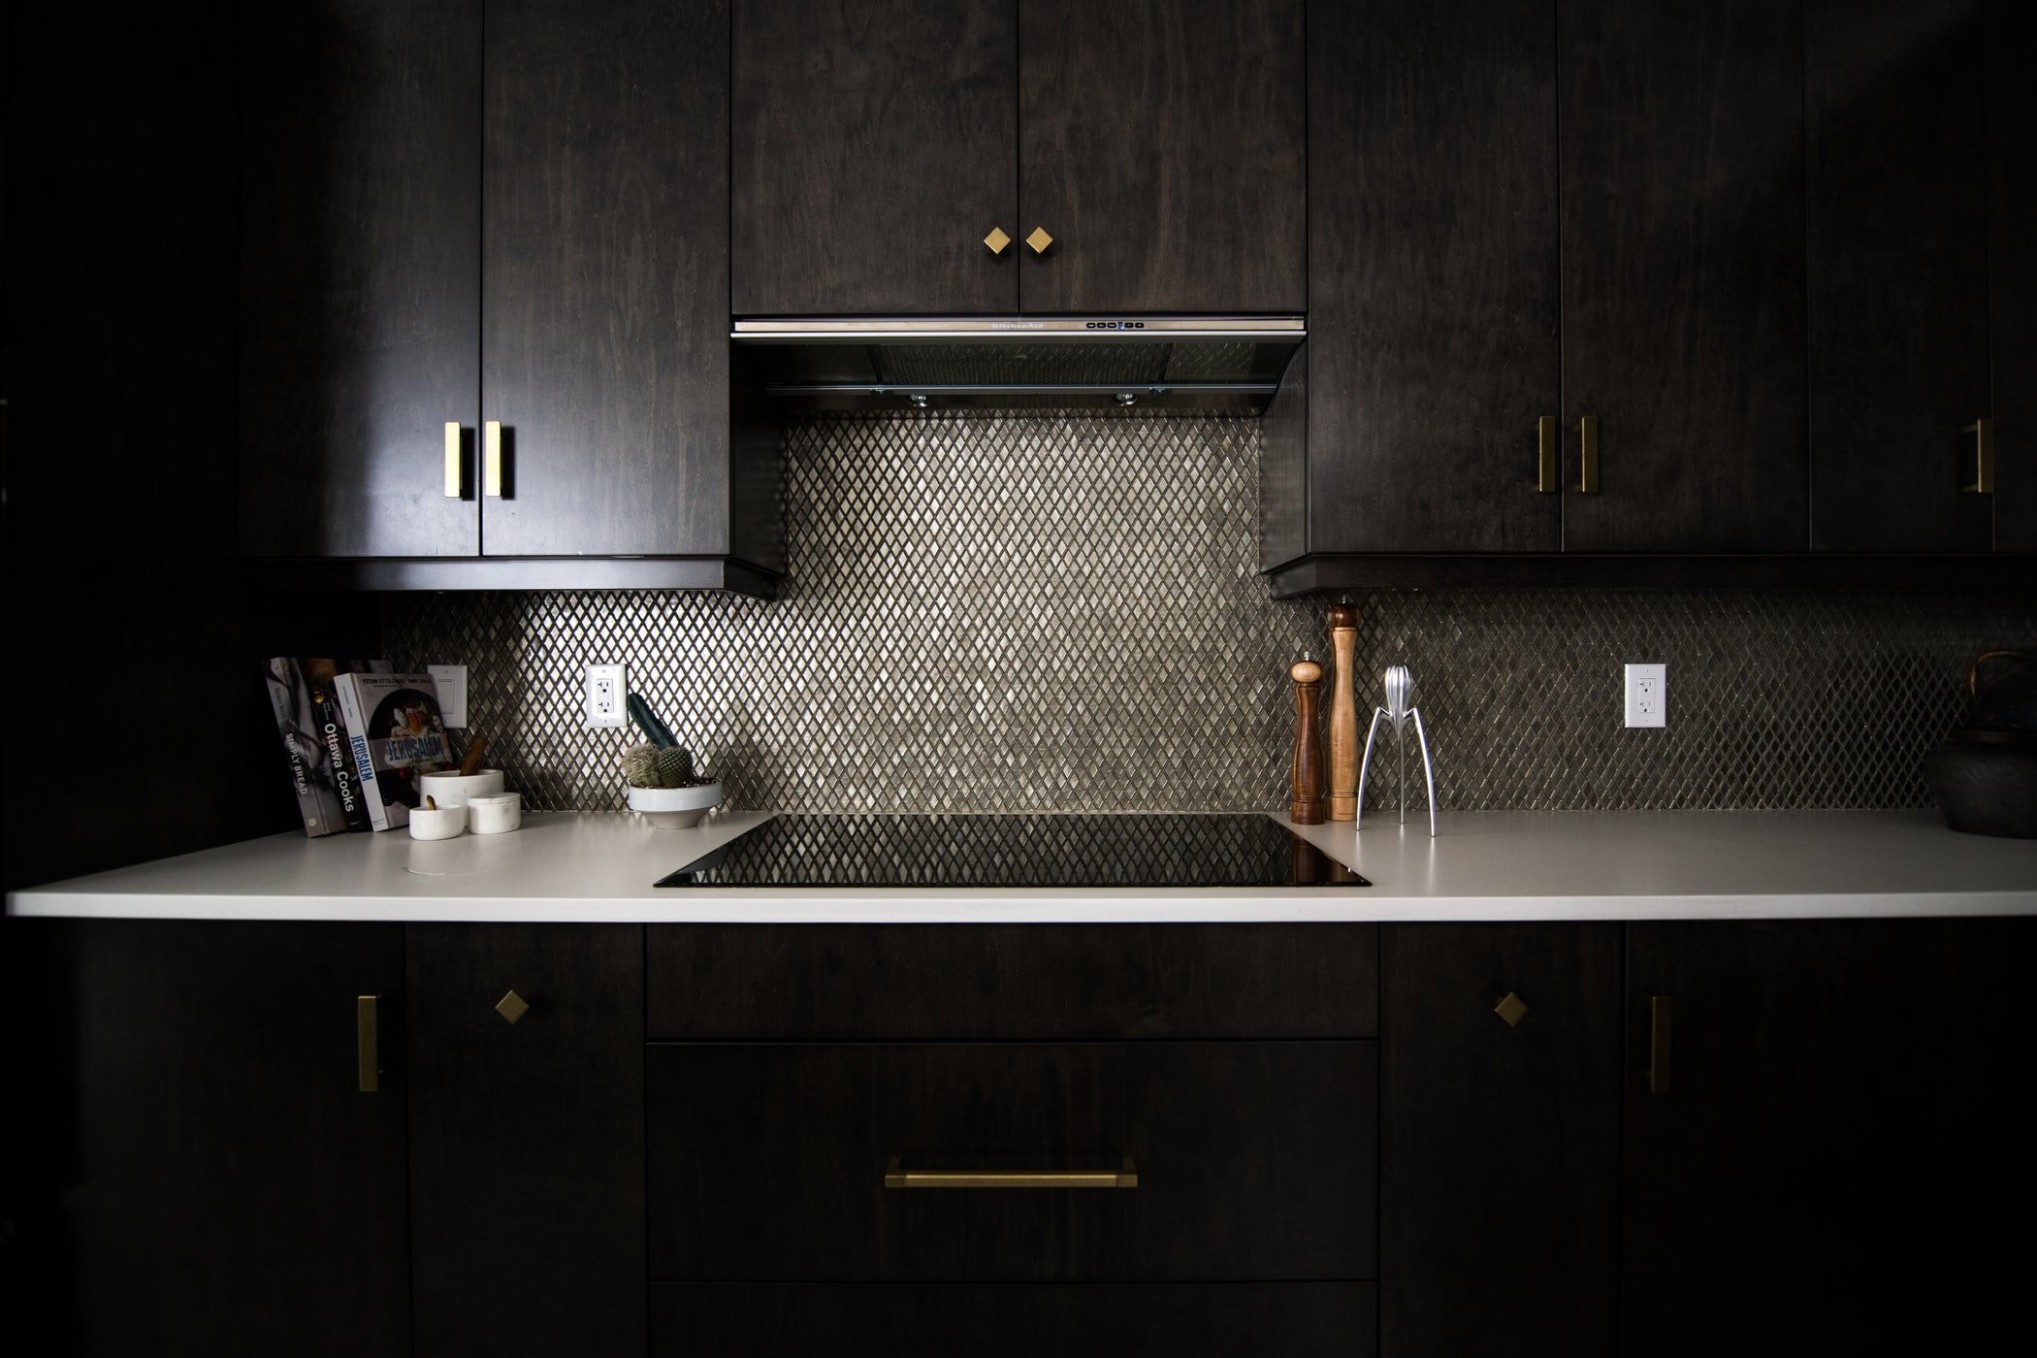 How to Brighten Up a Dark Kitchen — The Ultimate Guide - how do you decorate a dark kitchen?